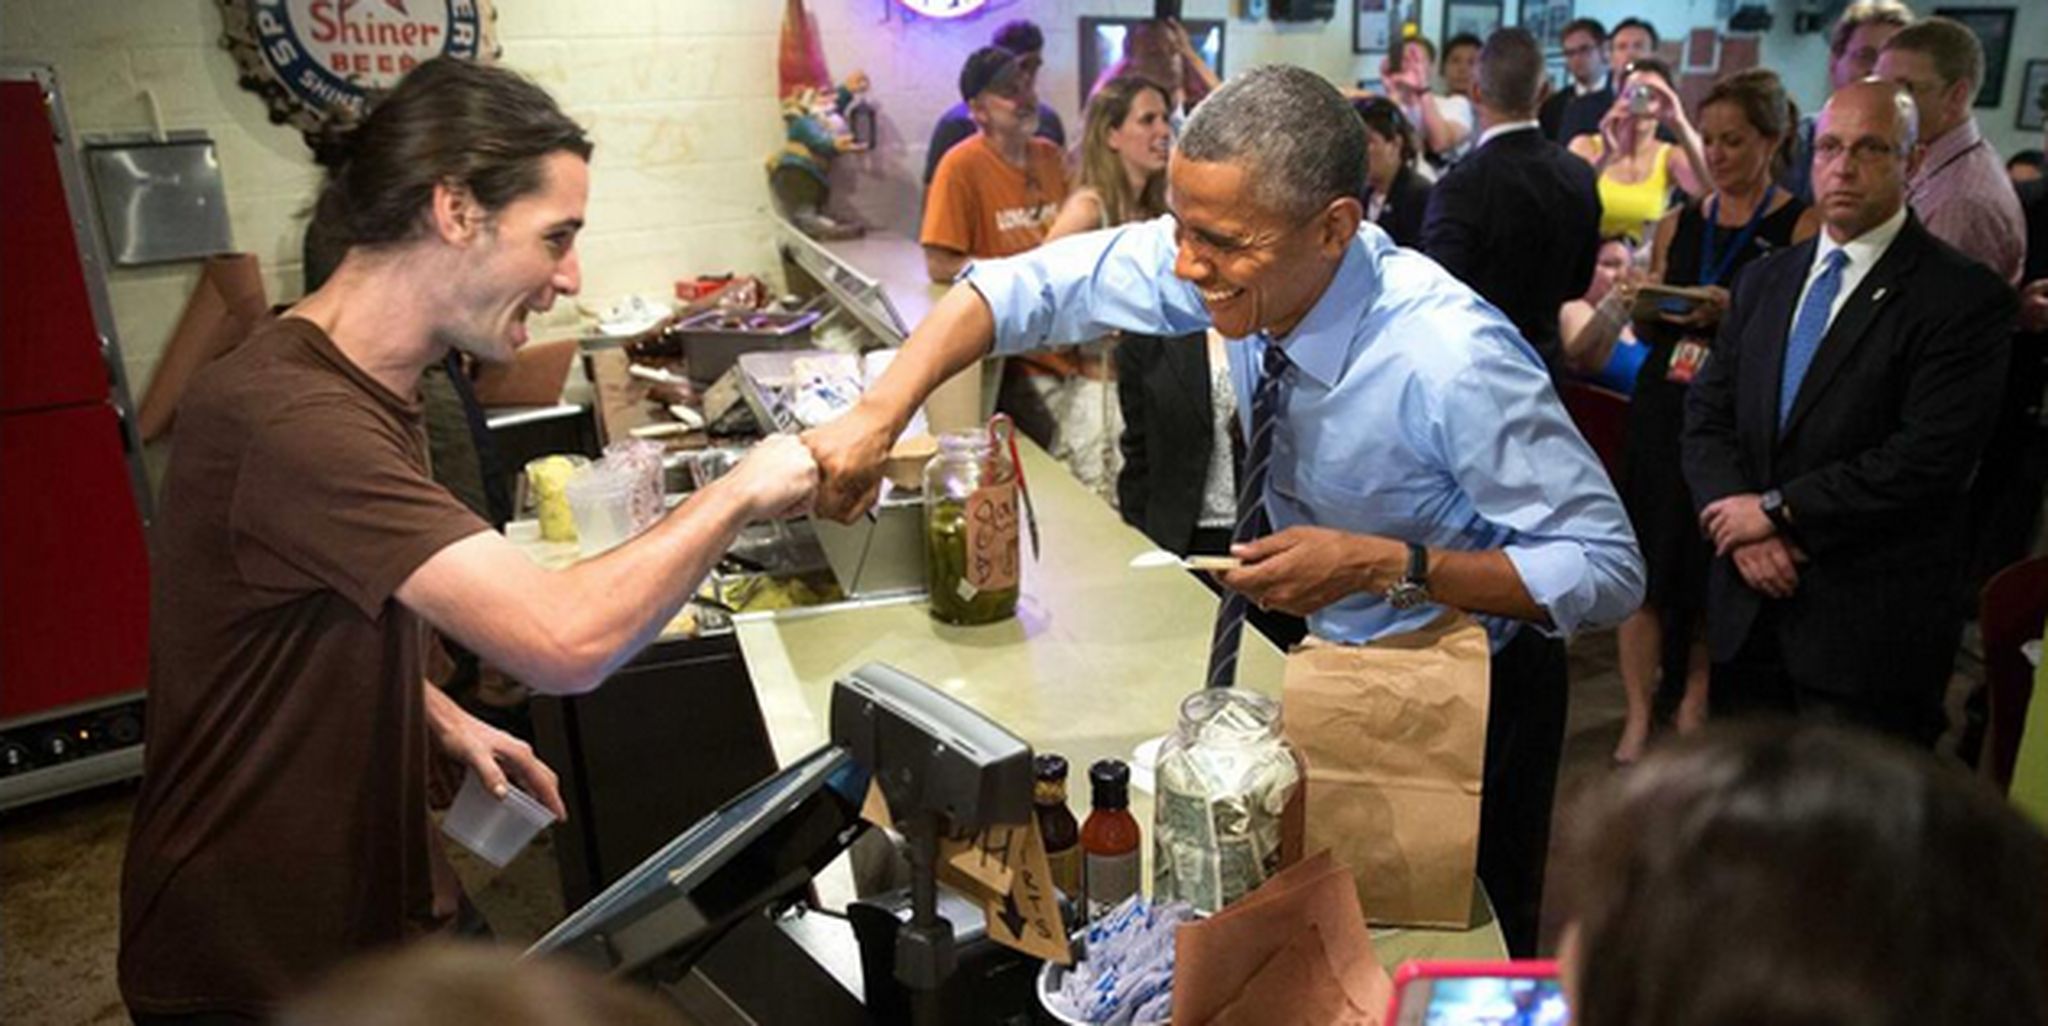 Obamas Austin barbecue fist bump was actually for gay rights